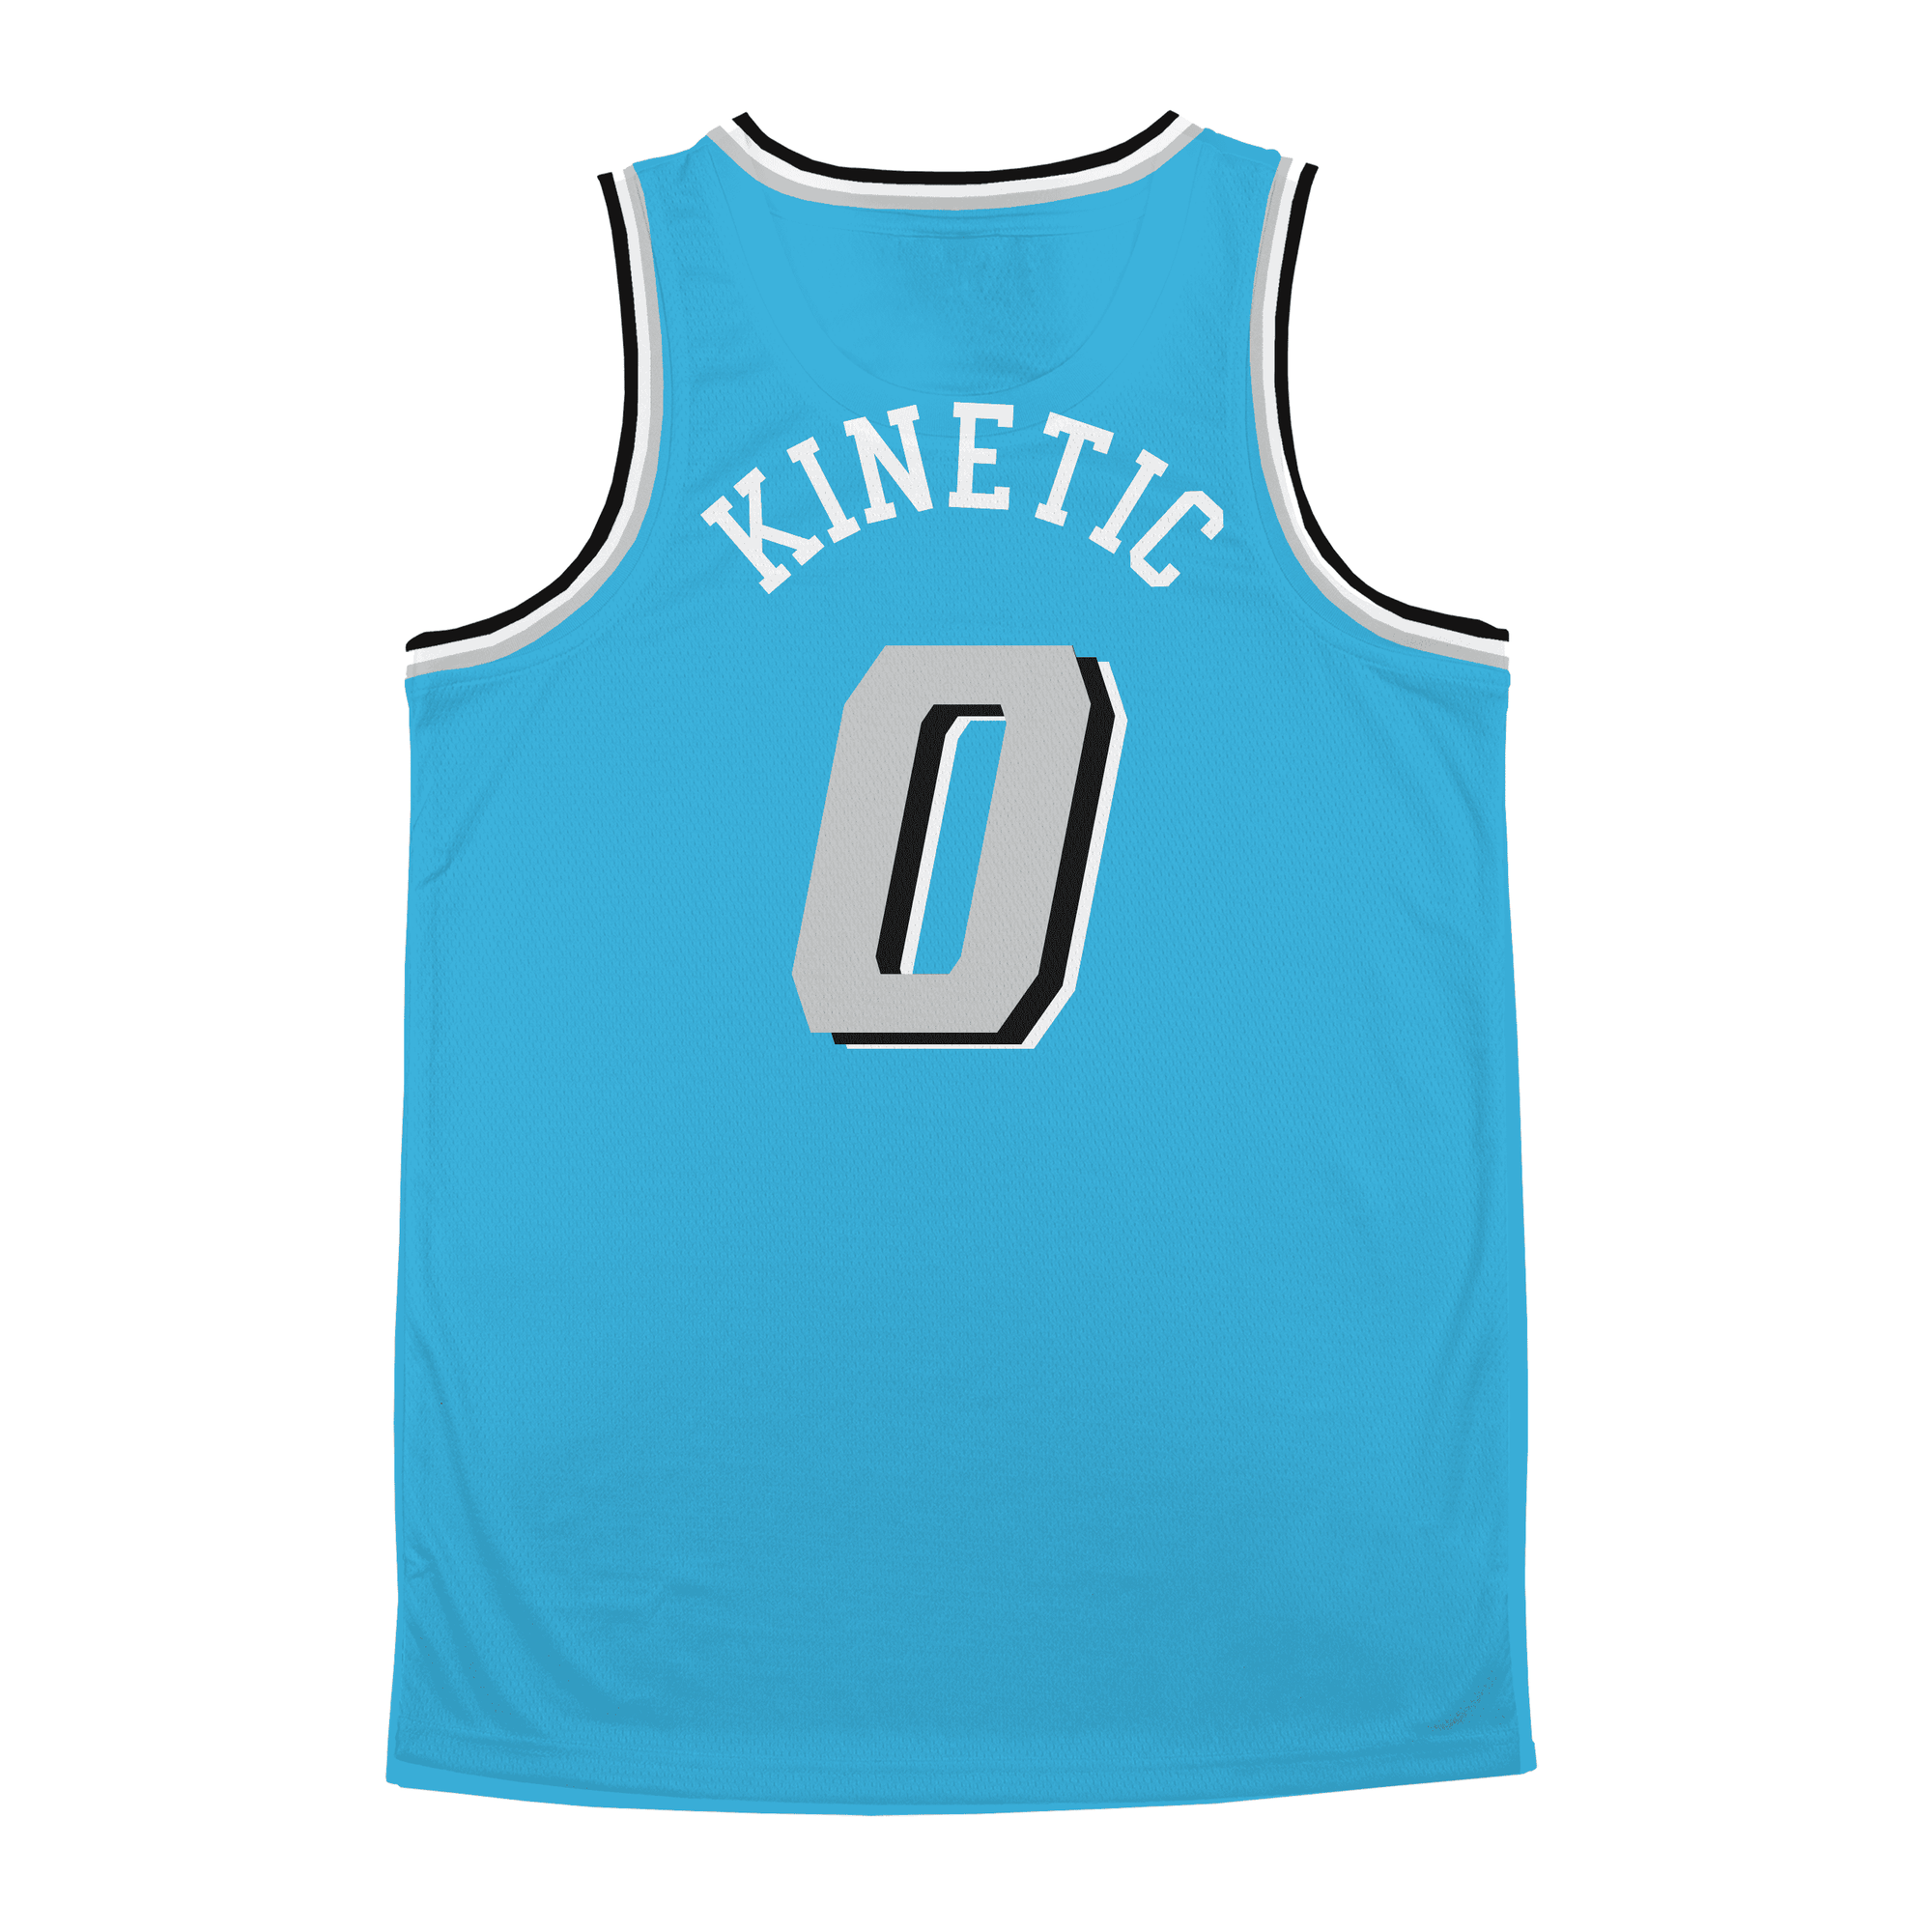 Acacia - Pacific Mist Basketball Jersey